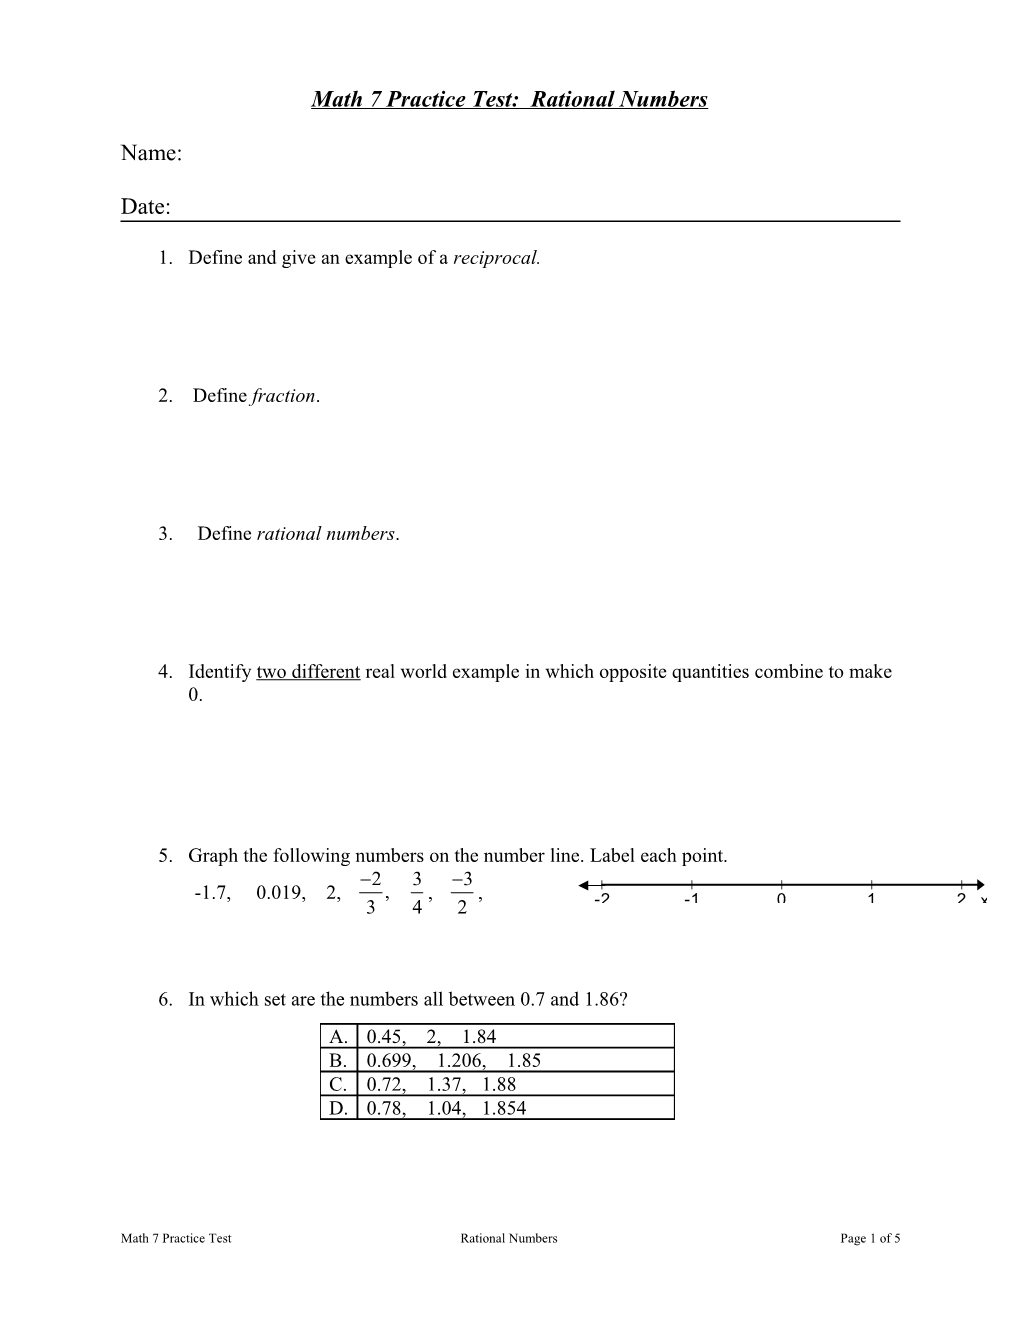 Math 7 Practice Test: Rational Numbers